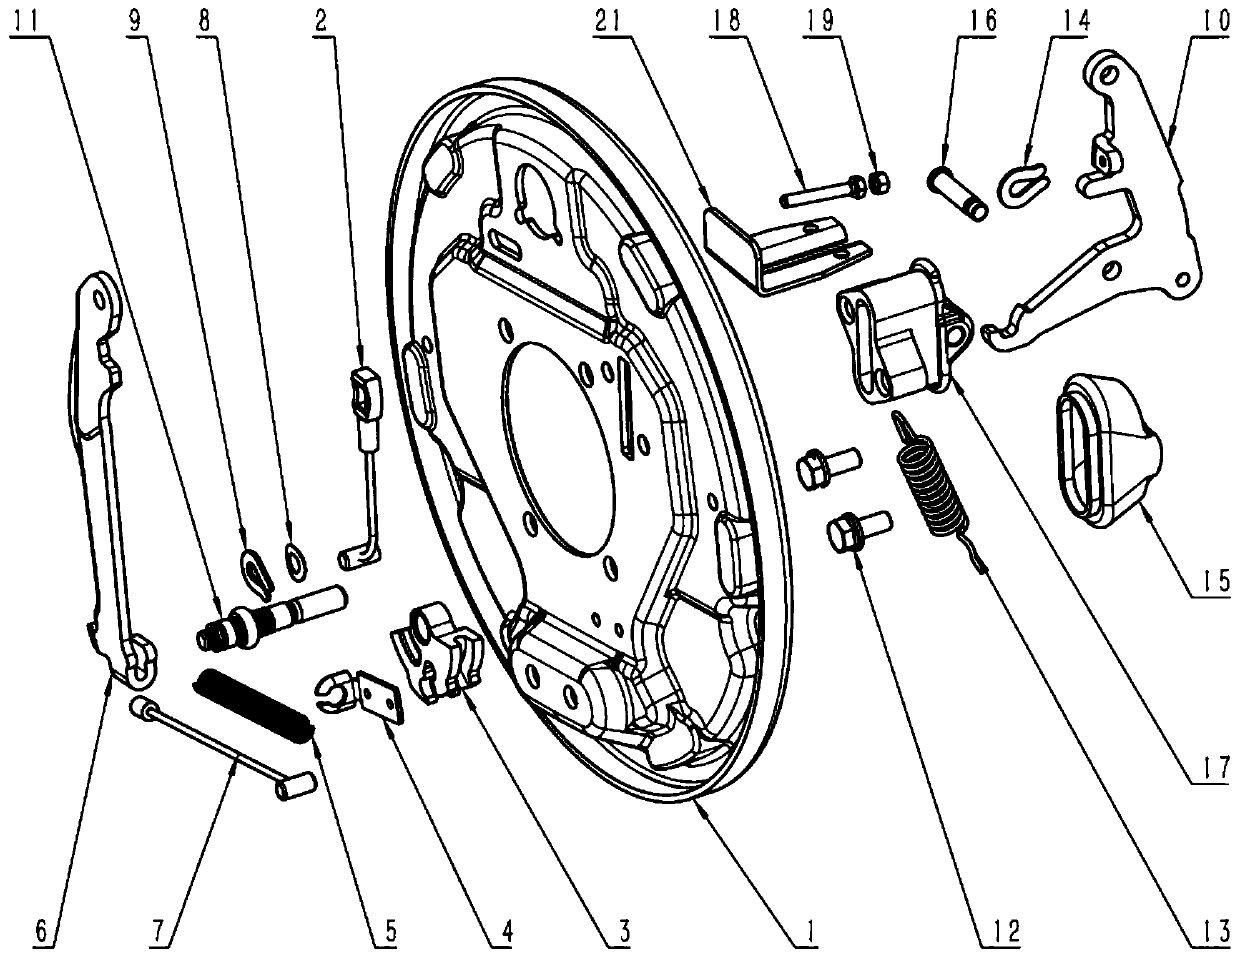 Novel double-pull-wire drum brake with rotating arm mechanism